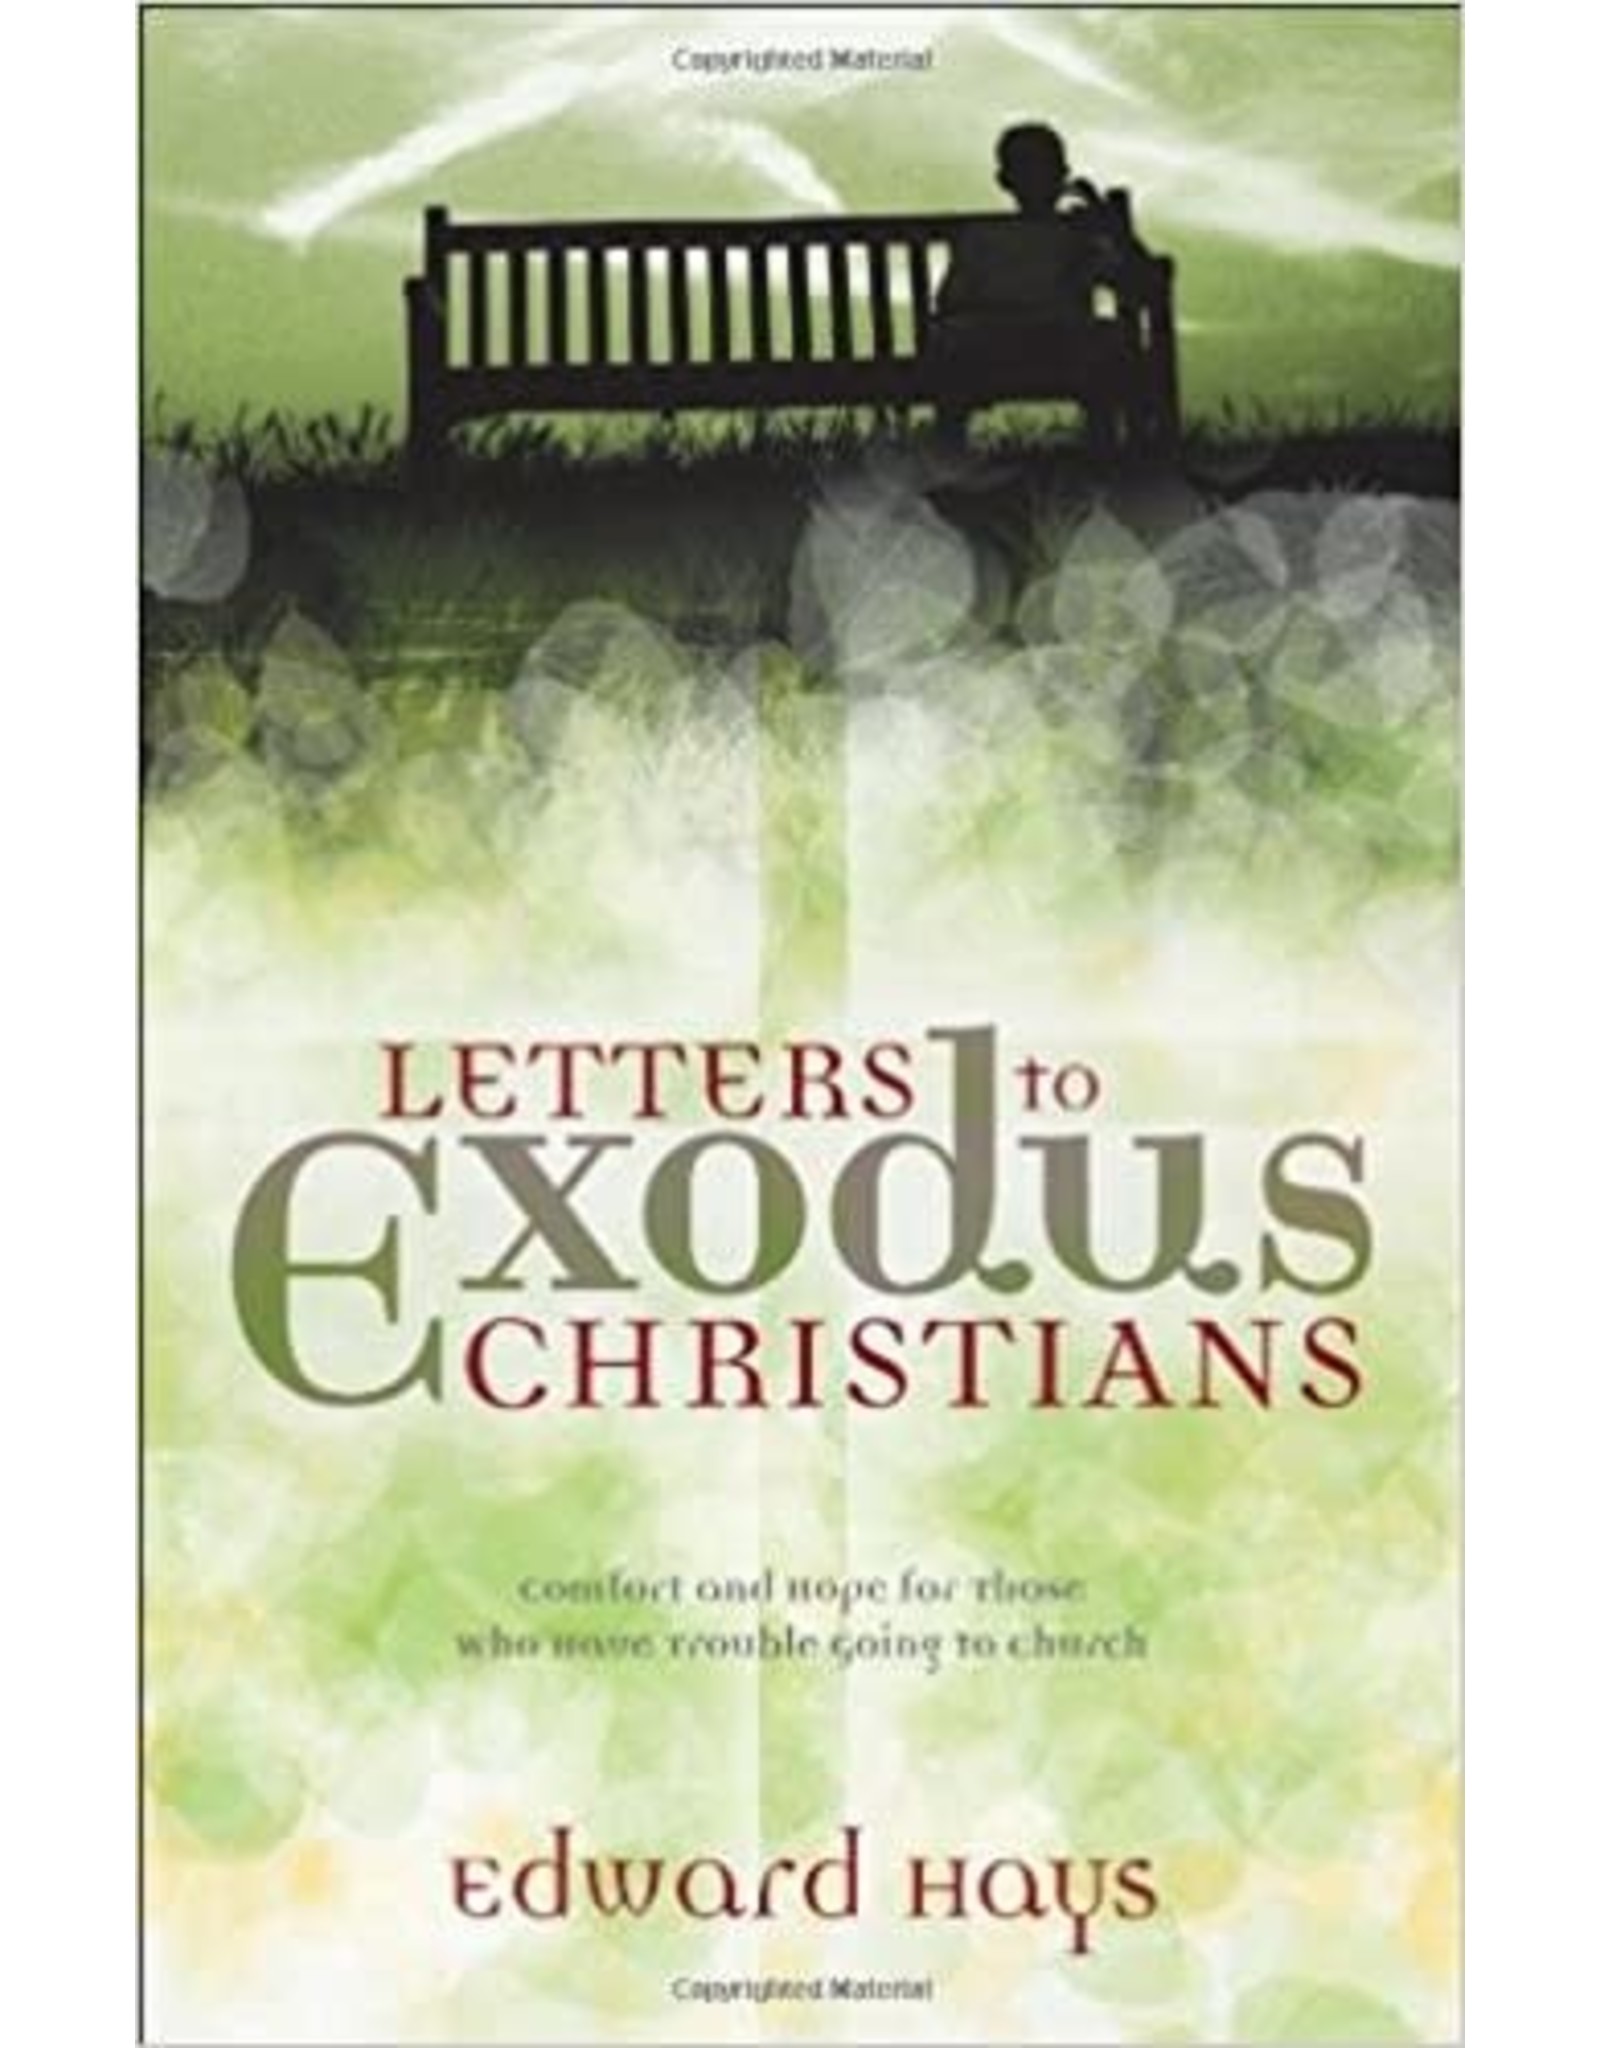 Ave Maria Letters to Exodus Christians: Comfort and Hope for Those Who Have Trouble Going to Church